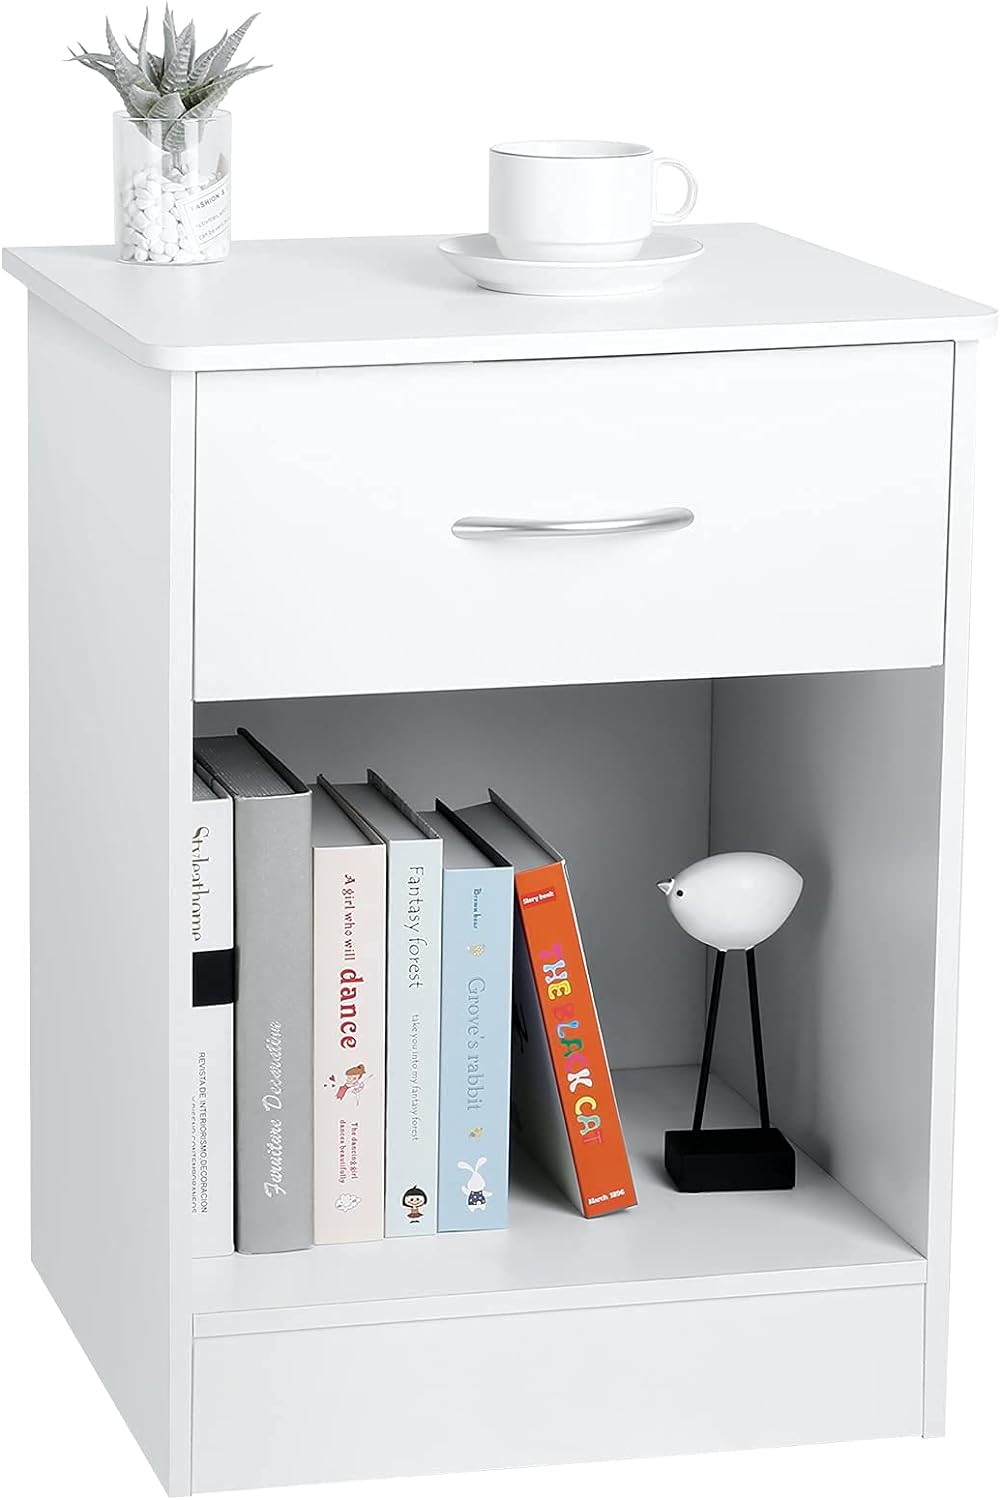 TUSY White Nightstand with Drawer, Bedside Table End Tables Living Room, File Cabinet Storage with Sliding Drawers and Shelf for Home Office